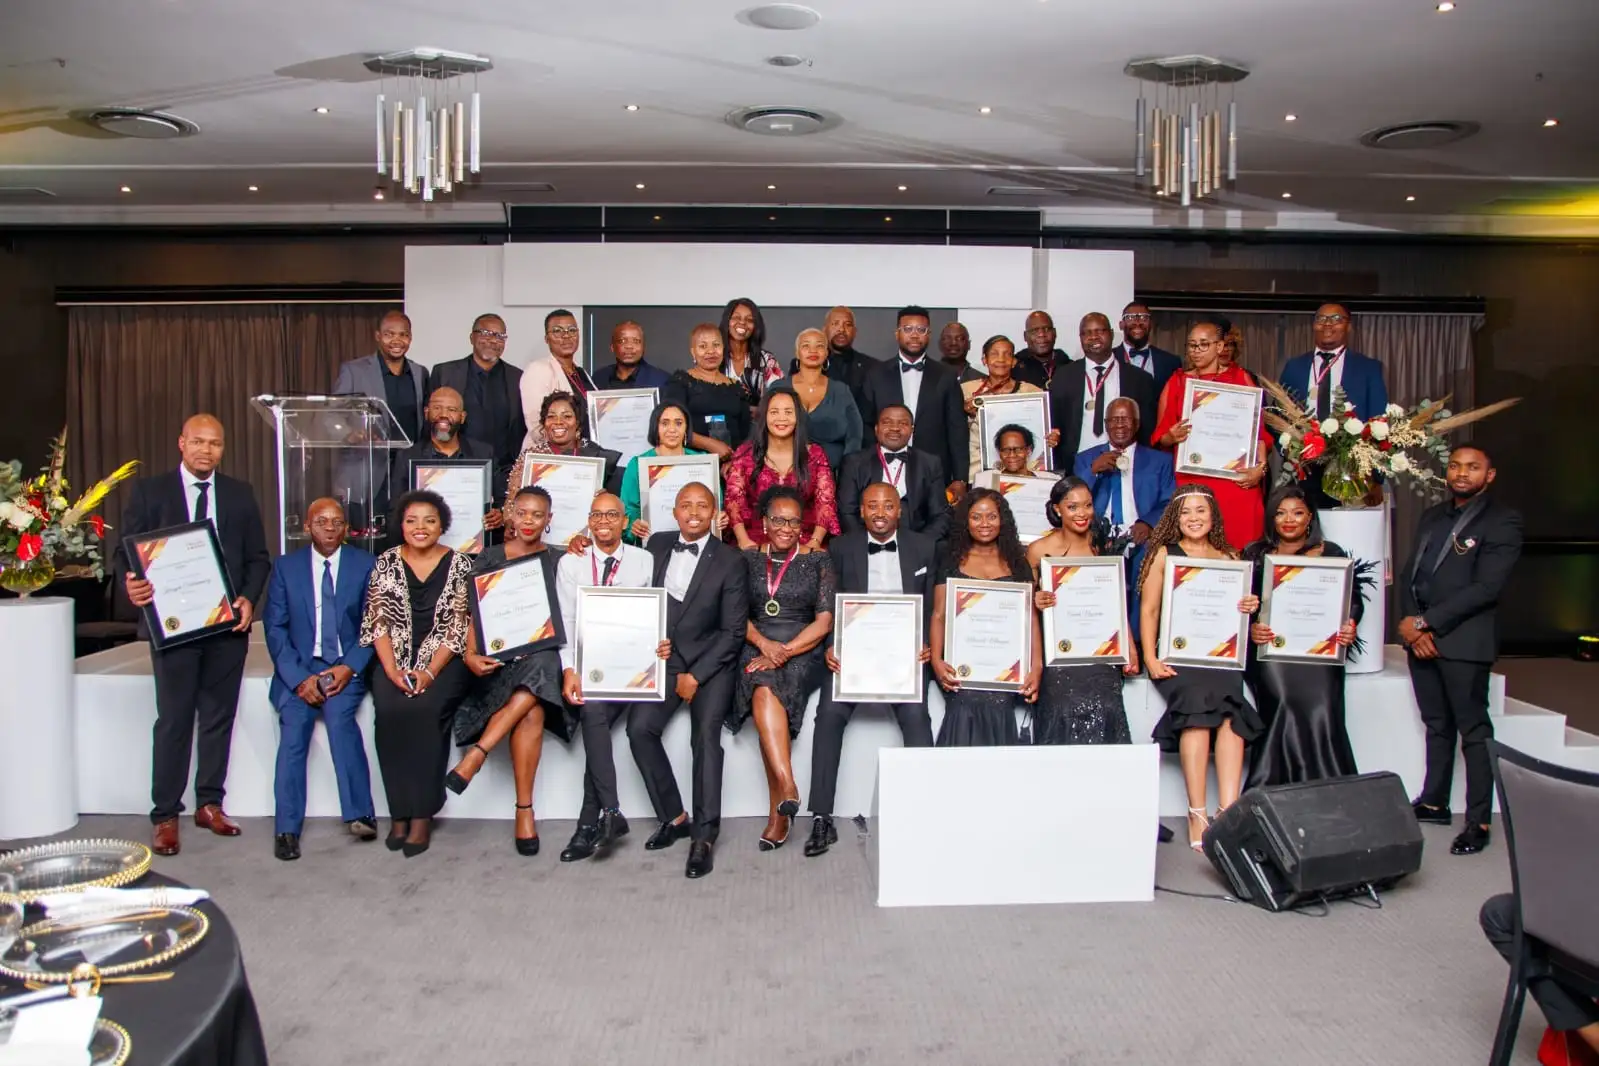 The recipients of the first South African Freight Awards